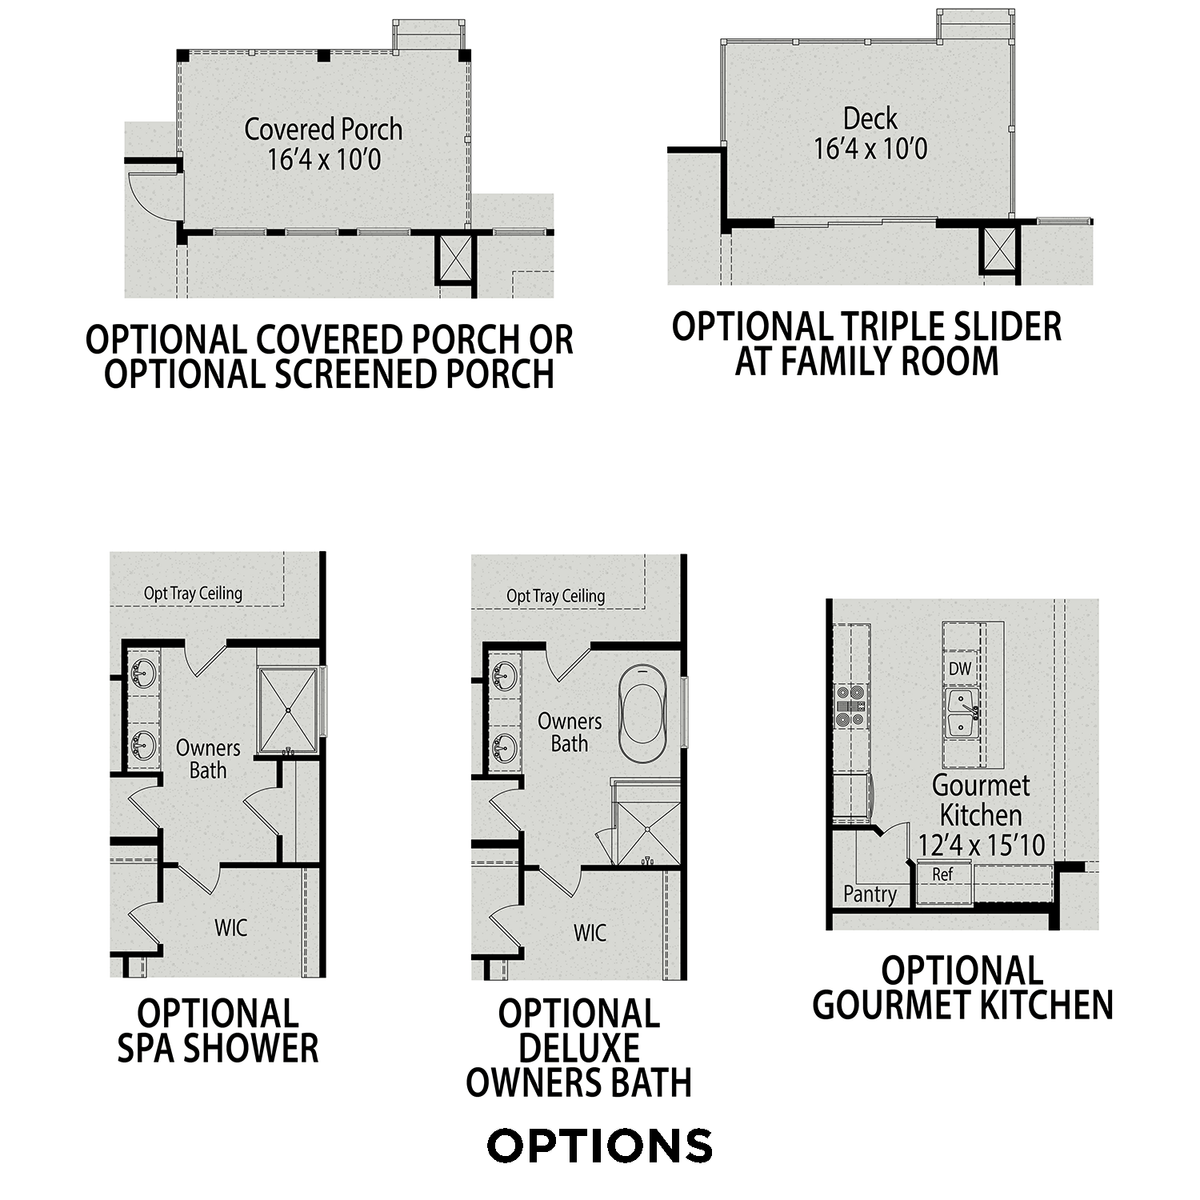 3 - The Cypress A buildable floor plan layout in Davidson Homes' Addison West community.